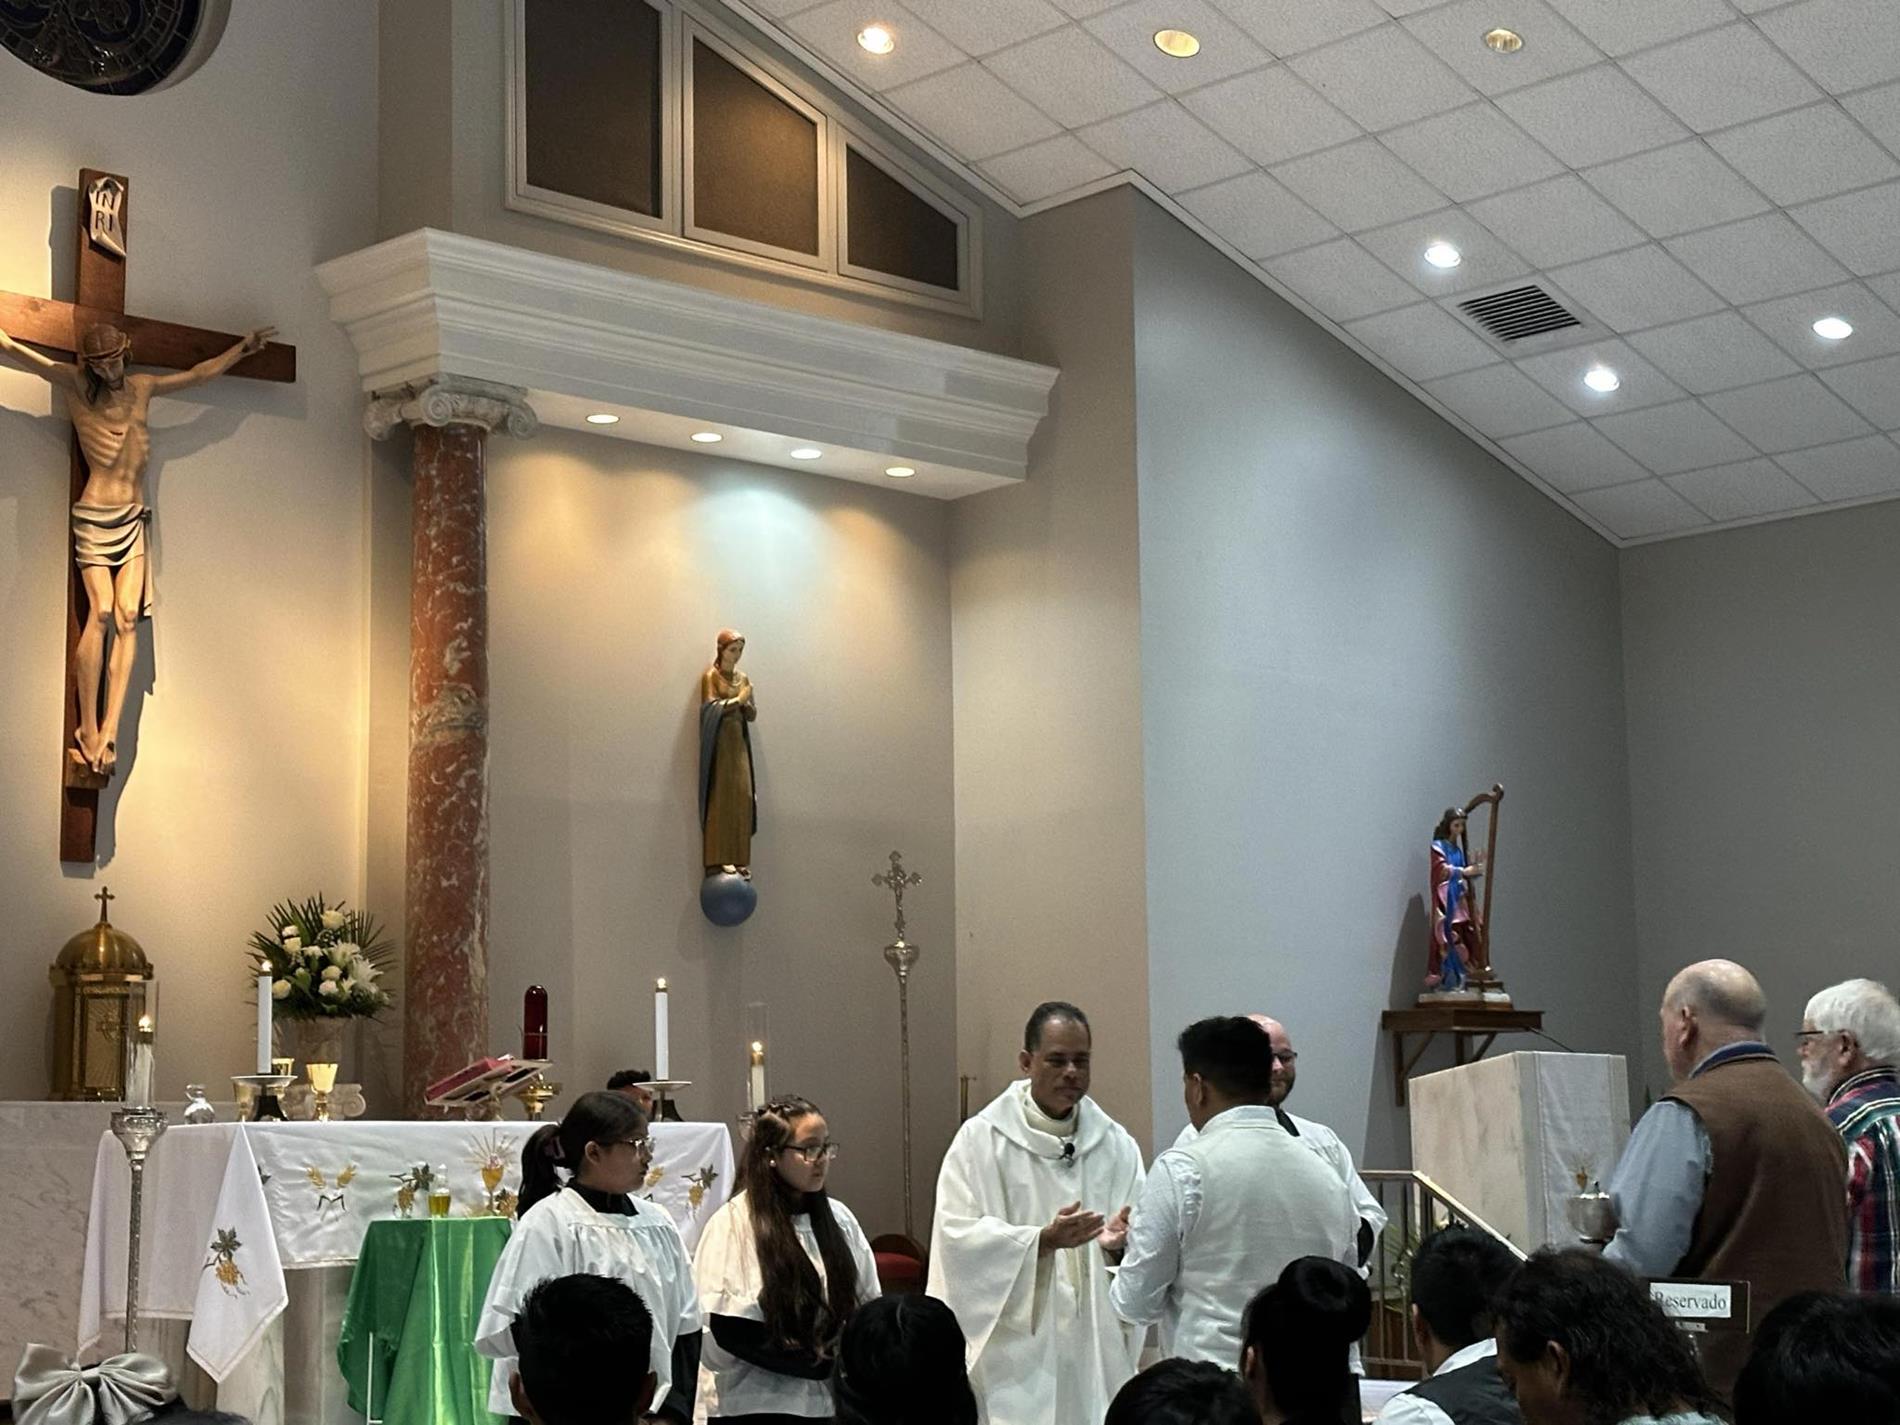 First Communion for several parishioners